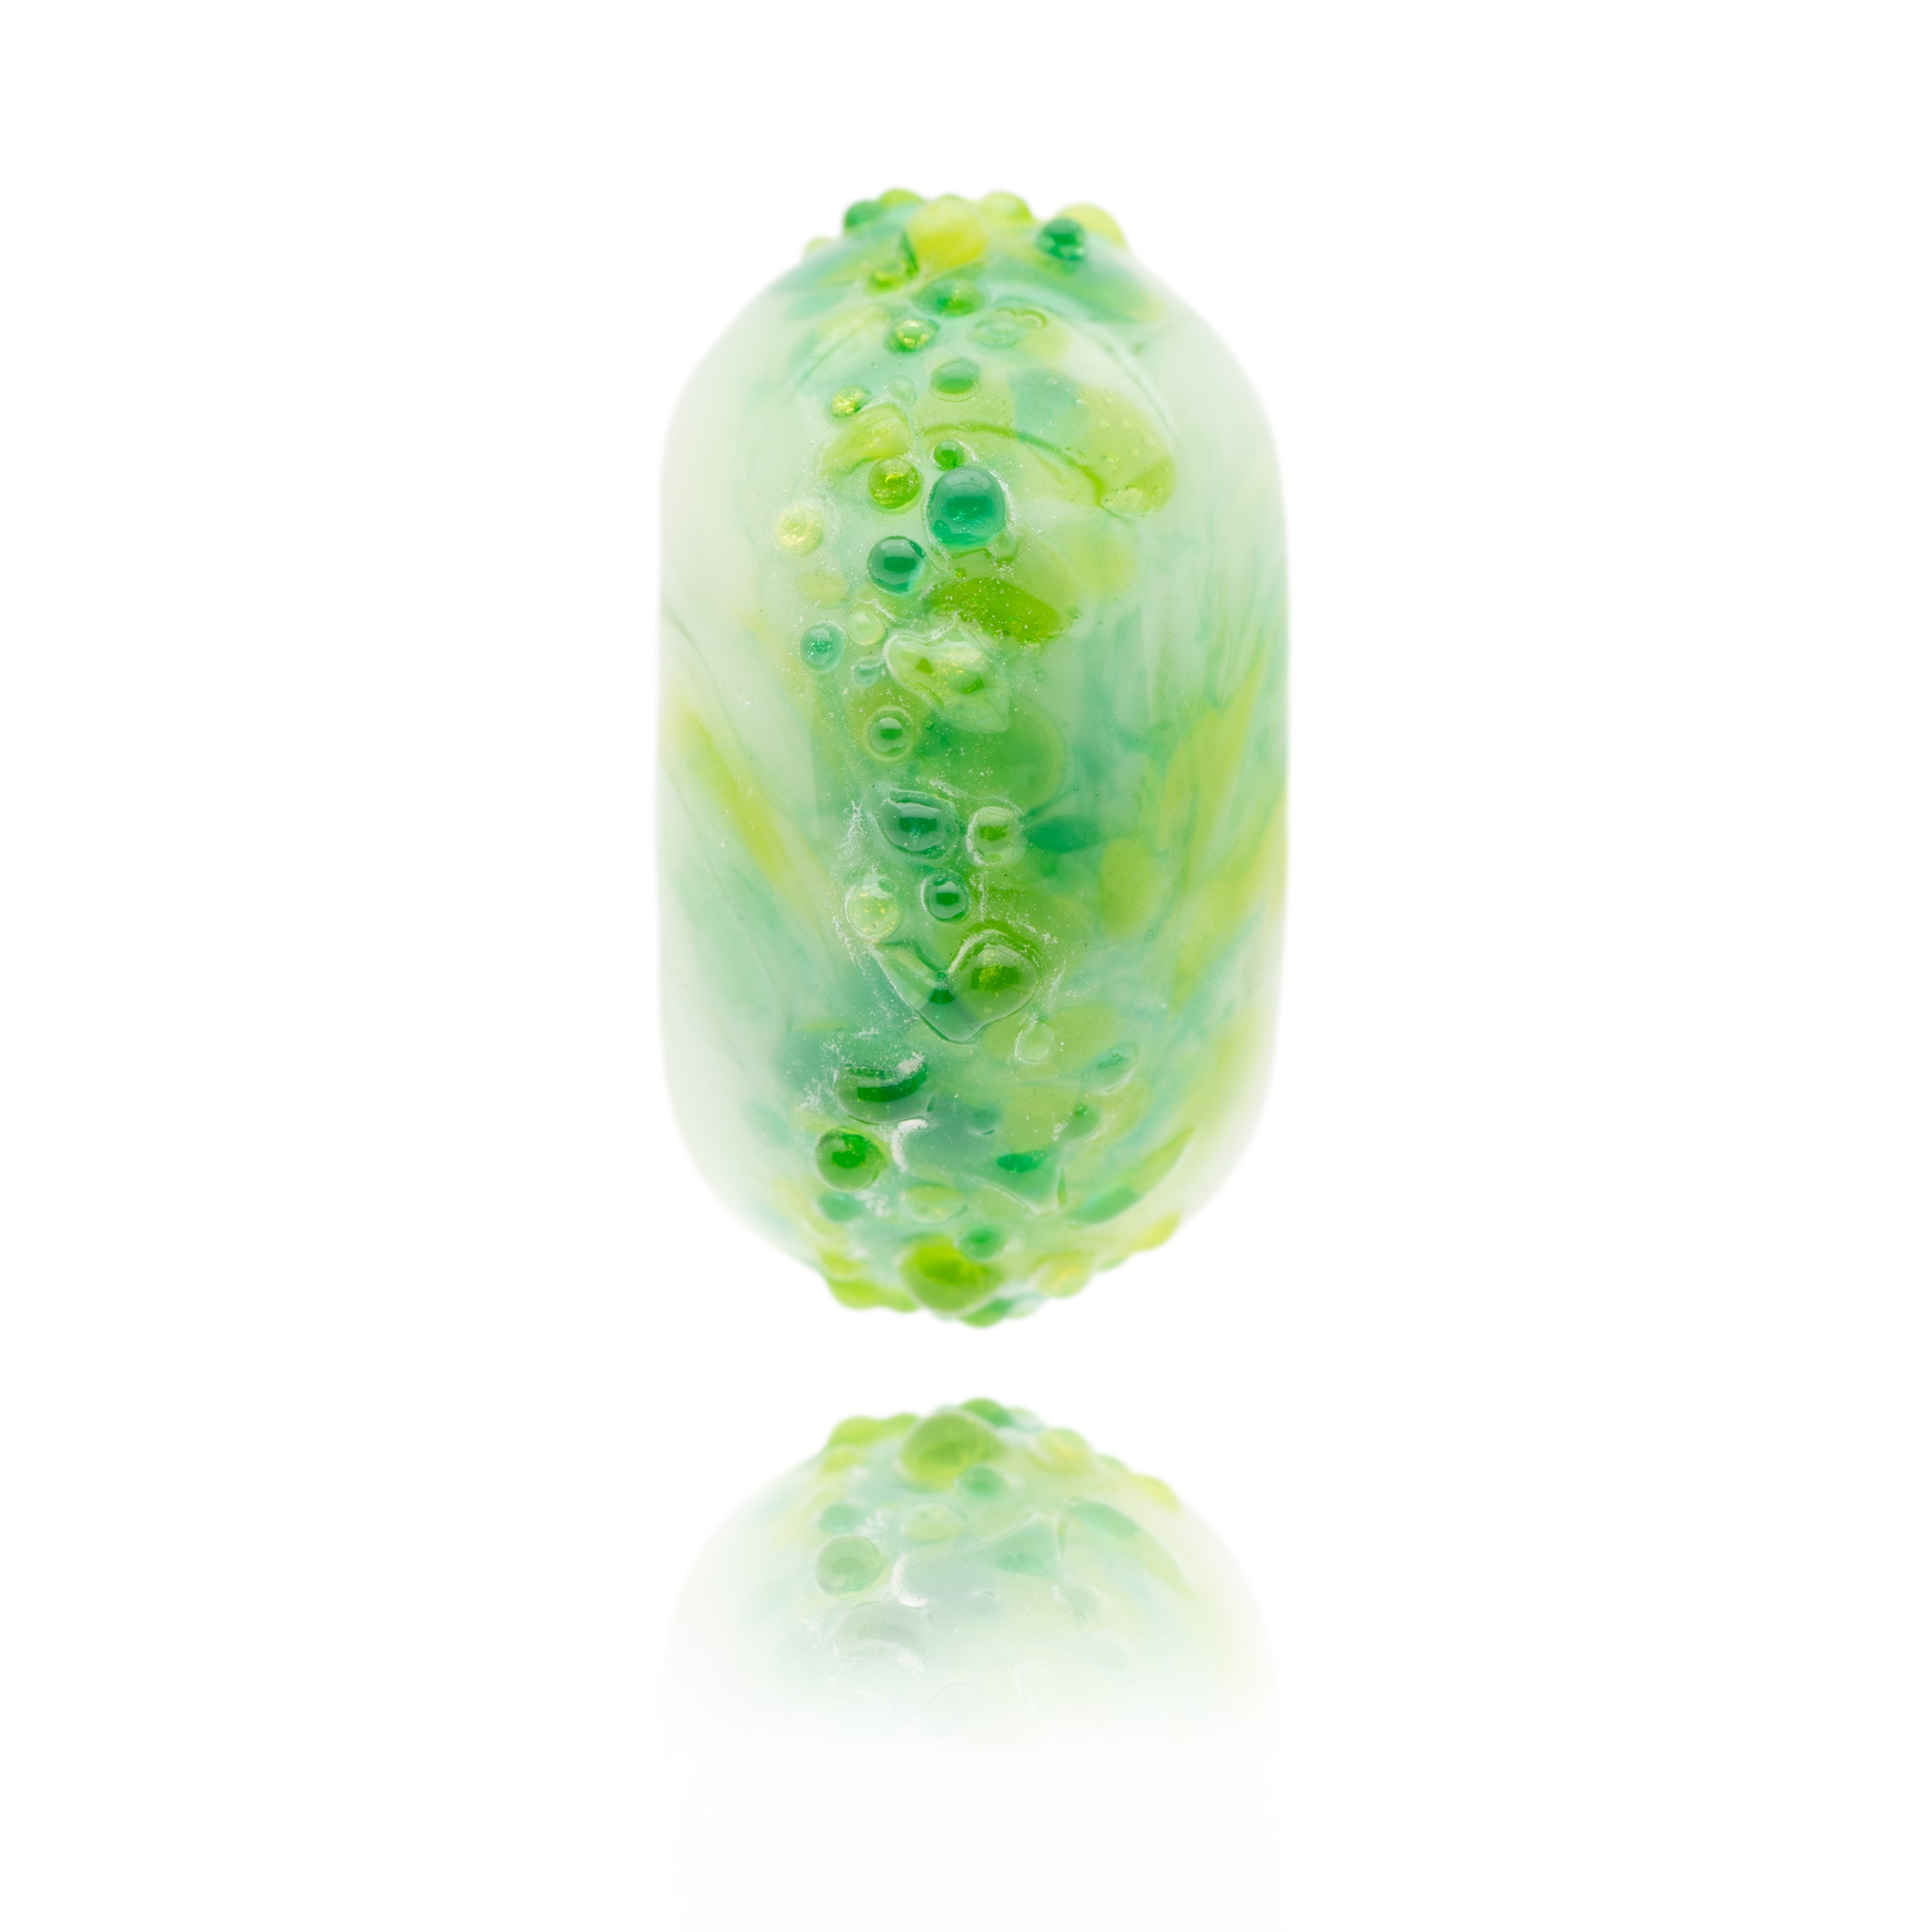 Green glass bead with shards of light and dark green glass on the surface. This bead represents Ballybunion in Ireland.